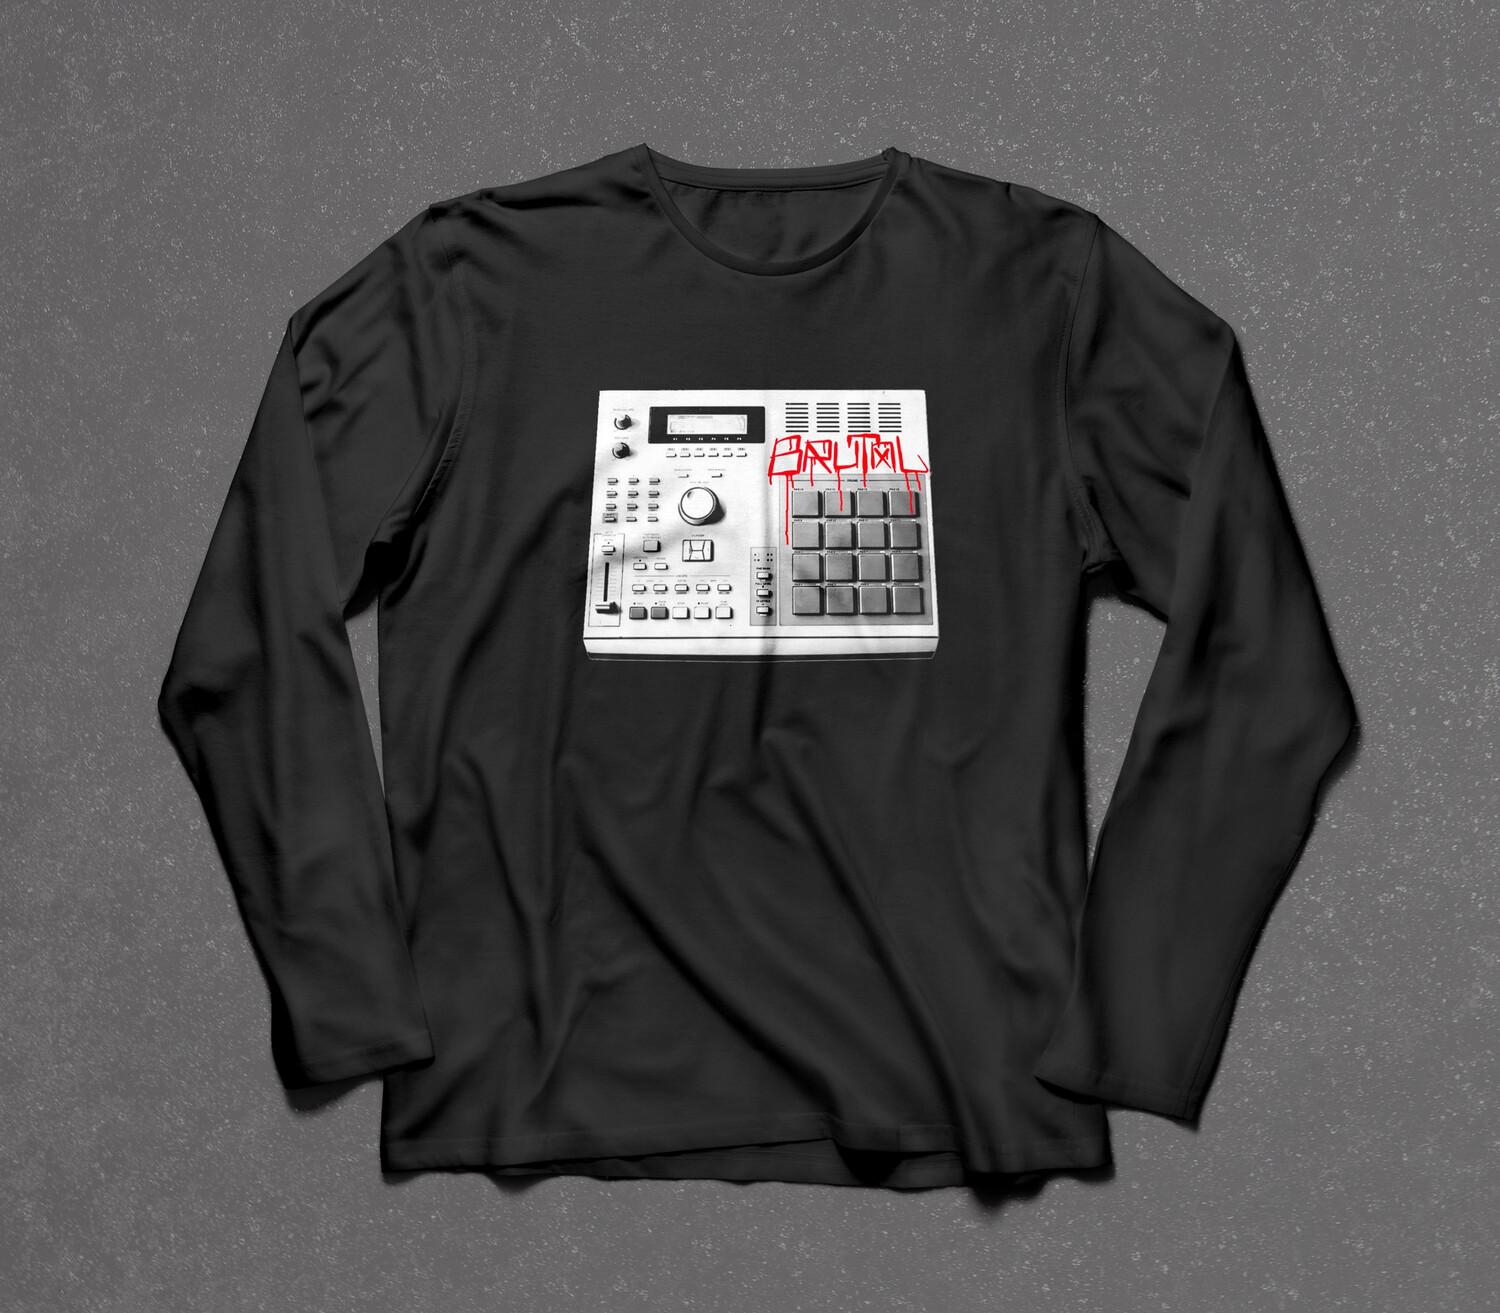 Limited Edition “BRUTAL MPC" Long Sleeve Shirt